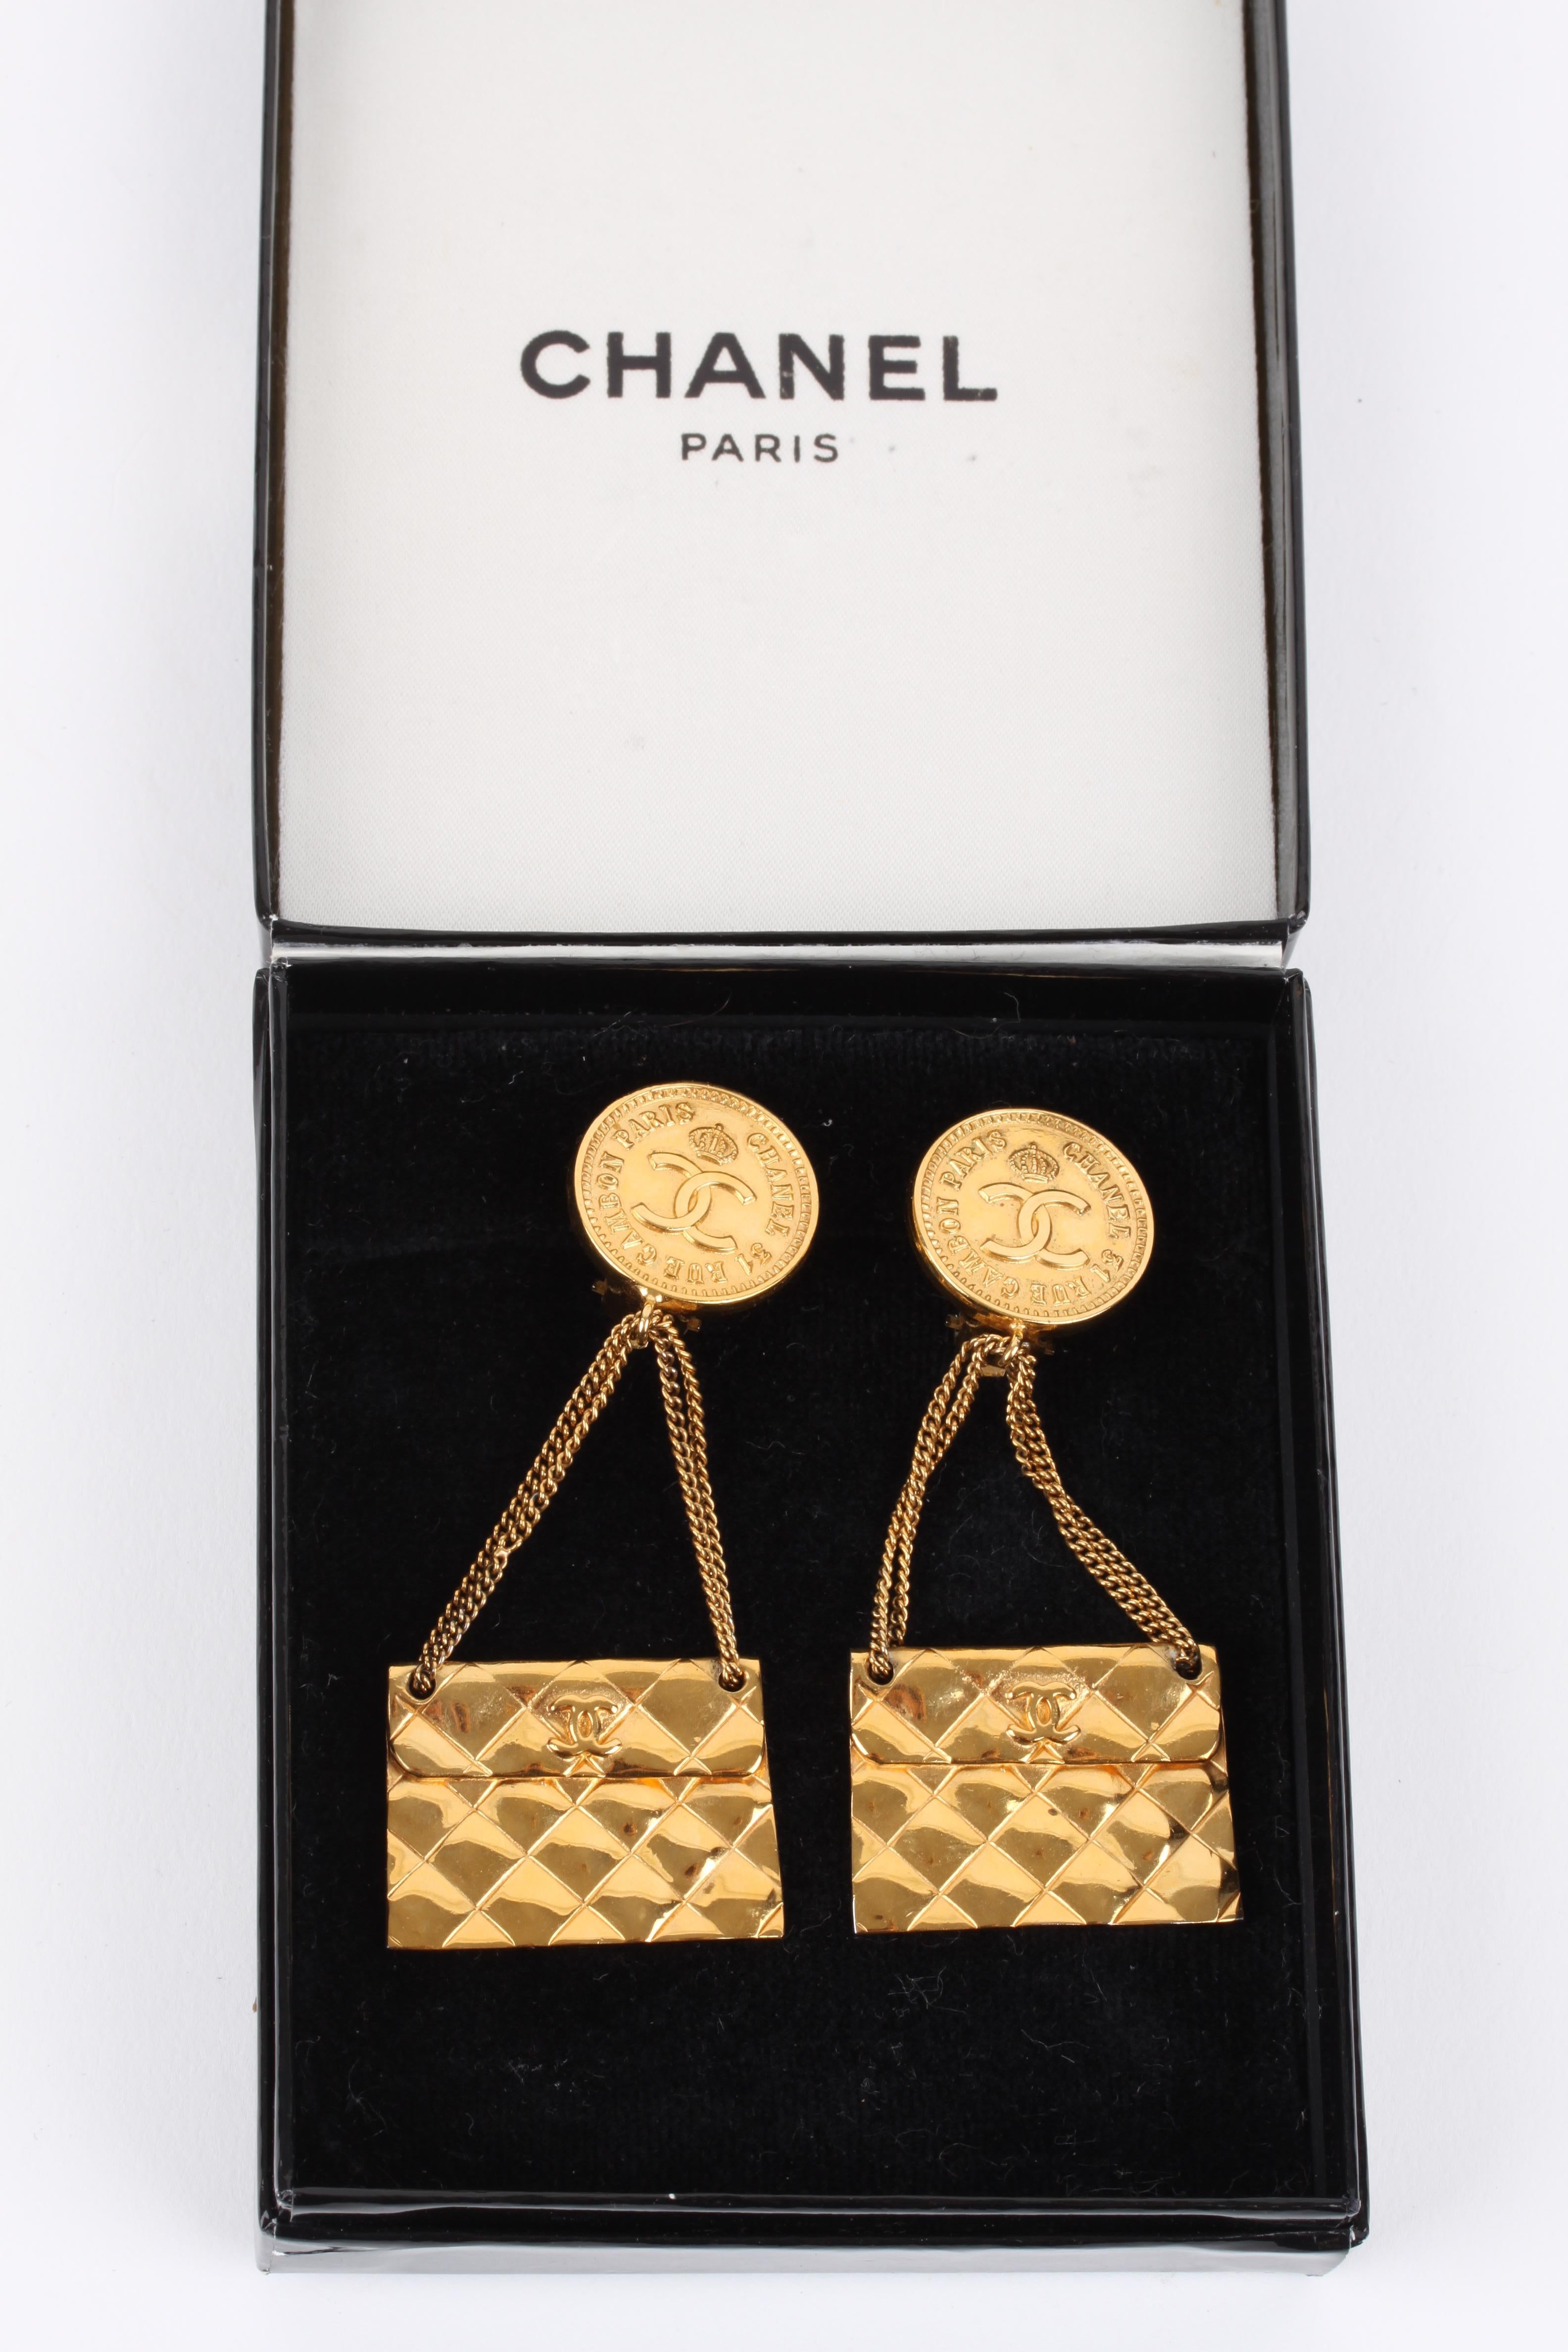 Spice up your outfit with these vintage Chanel clip earrings crafted from gold-tone metal.

On top a round coin with an interlocking CC logo in the center, a quilted 2.55 flap bag charm is dangling underneath on a thin chain.

Total length of these